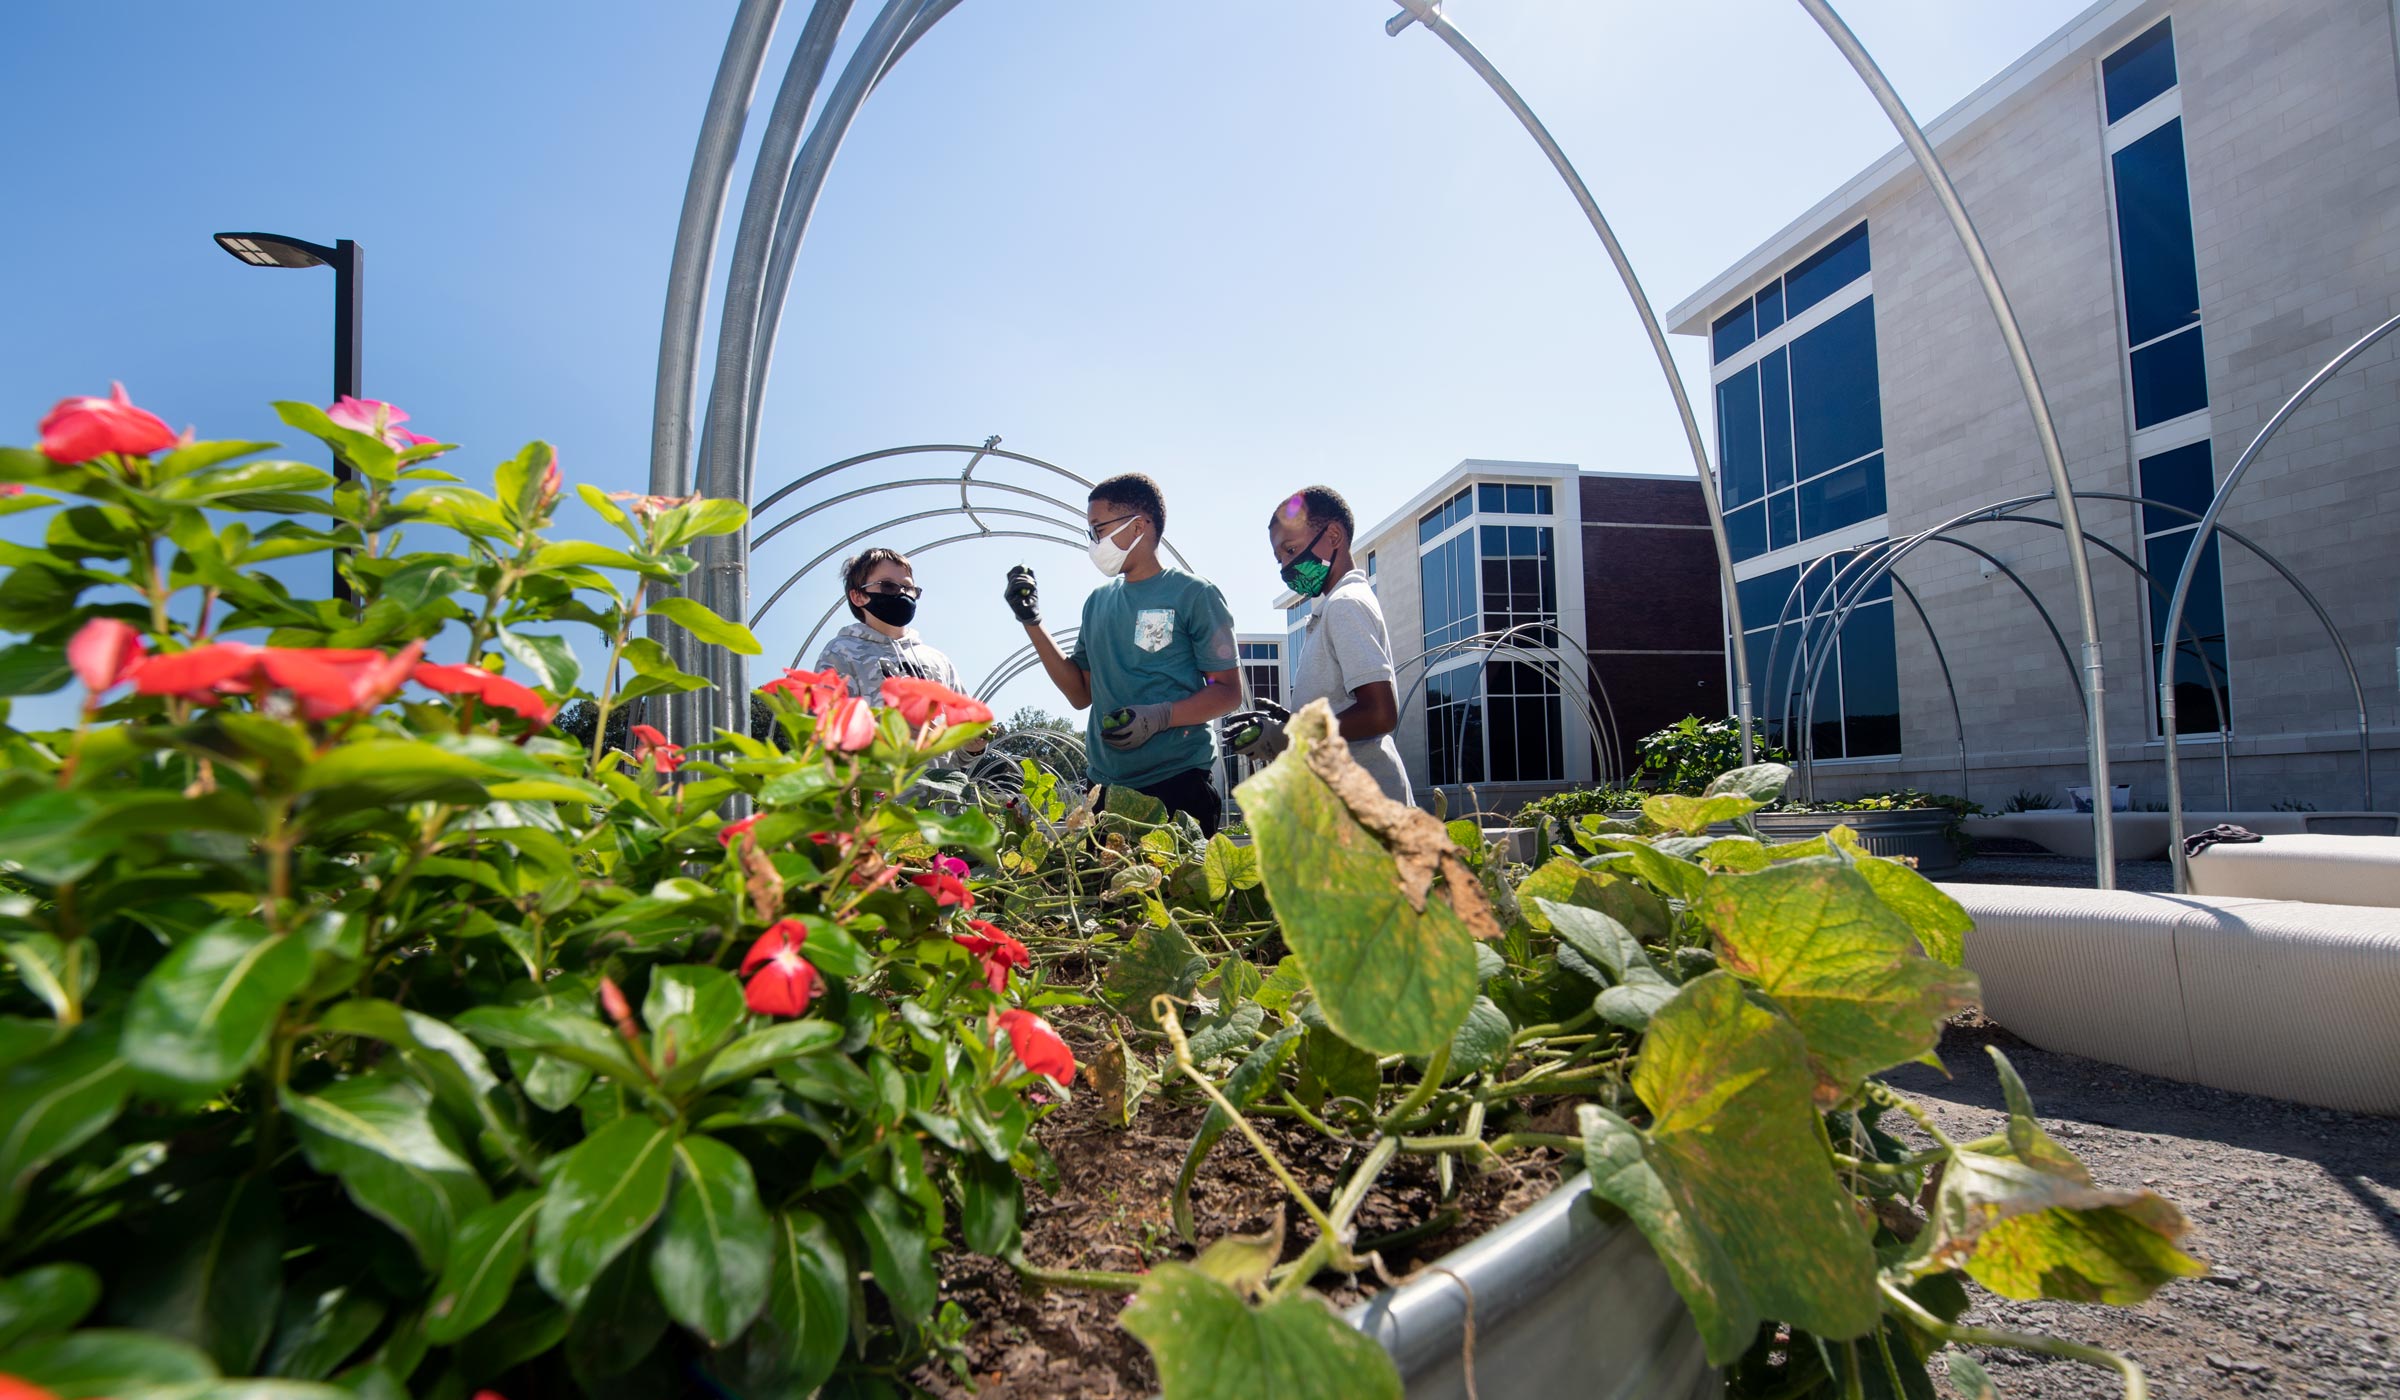 With a planter overflowing with flowers and vegetables in the foreground, three 6th grade boys harvest cucumbers in the mid-ground, with the Partnership Middle School wing beyond.